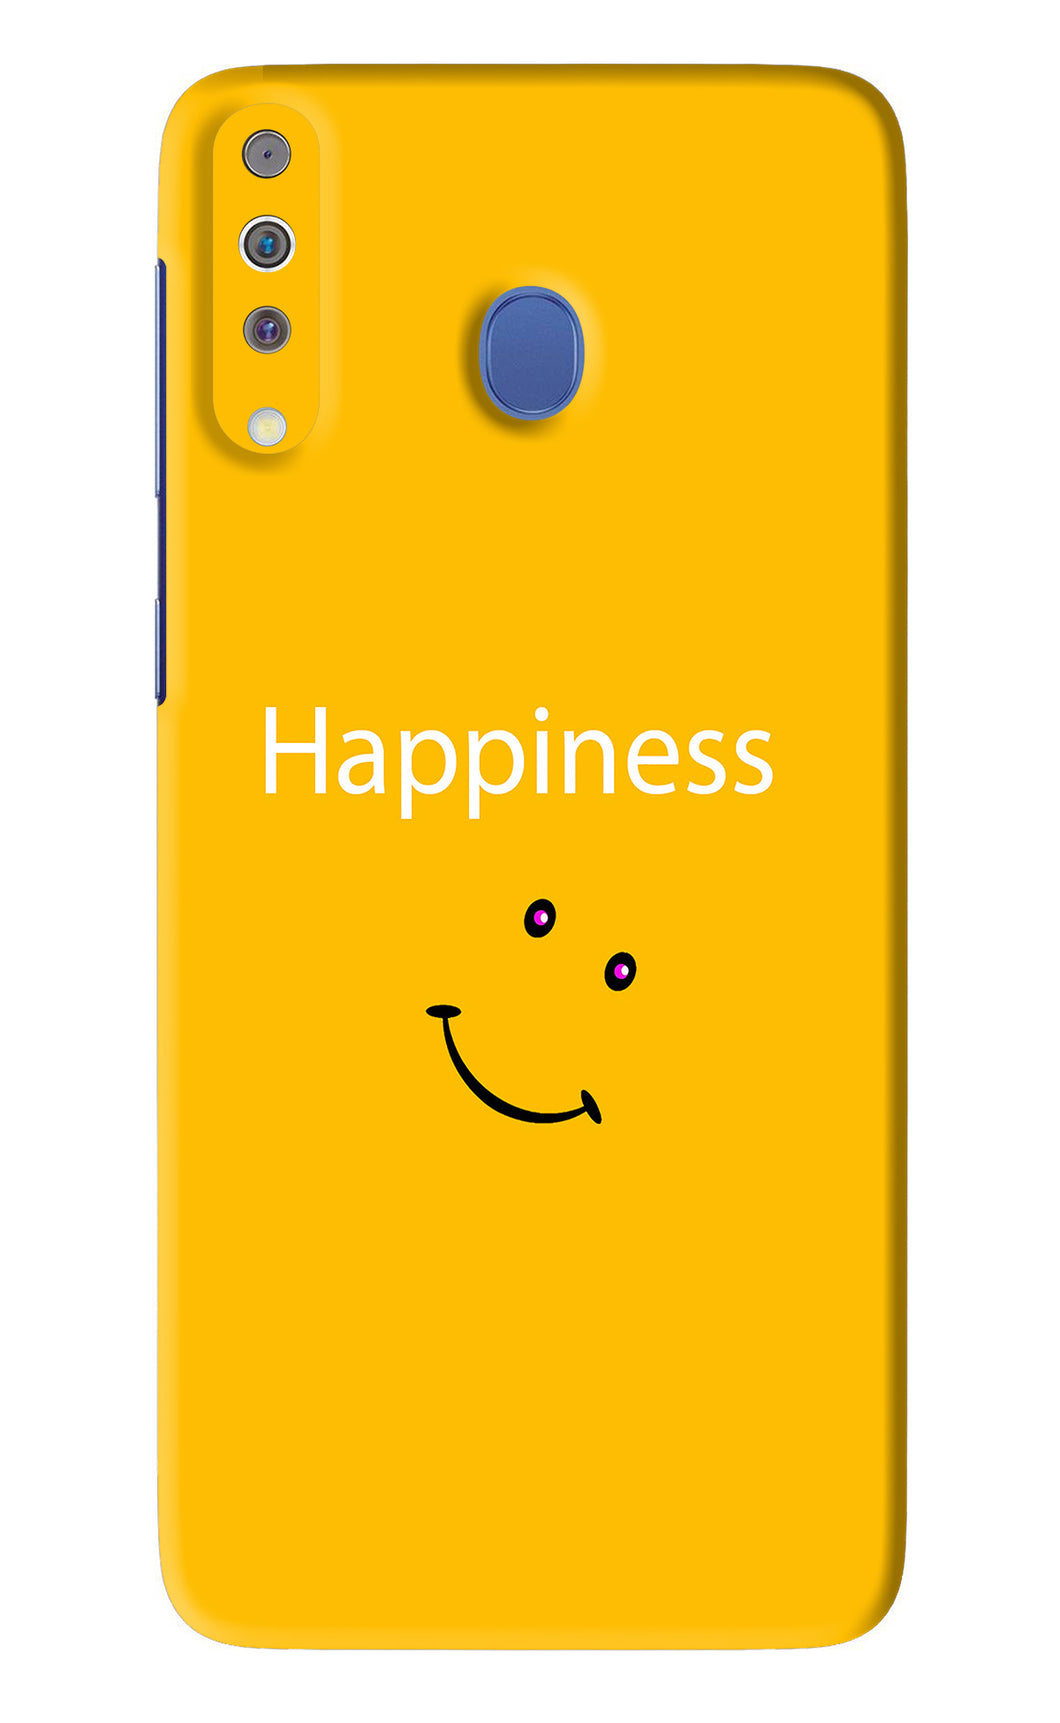 Happiness With Smiley Samsung Galaxy M30 Back Skin Wrap